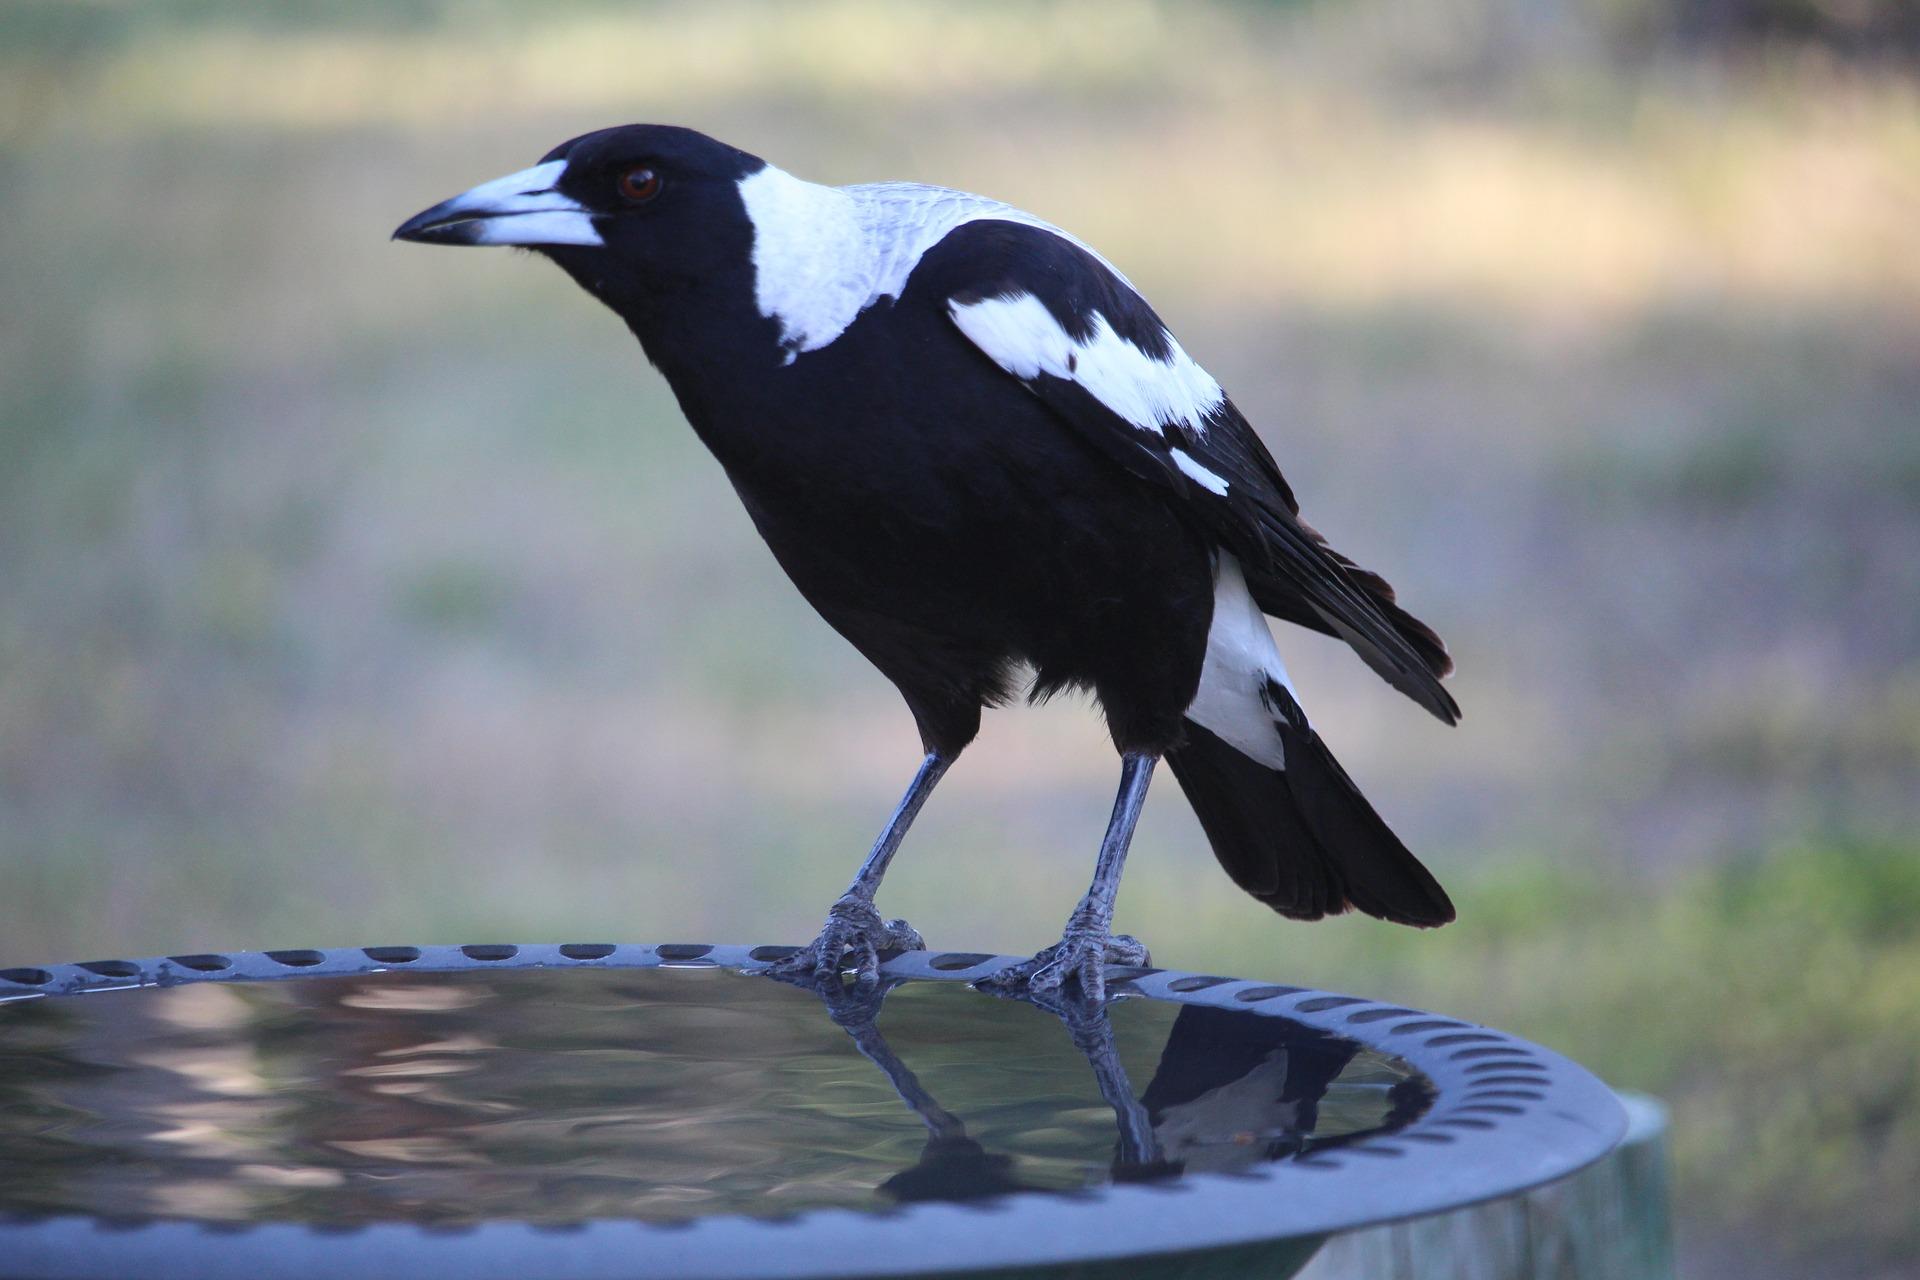 How to make your backyard bearable this summer - Put a birdbath in your backyard and help our feathered friends stay cool as well, Australian Outdoor Living.